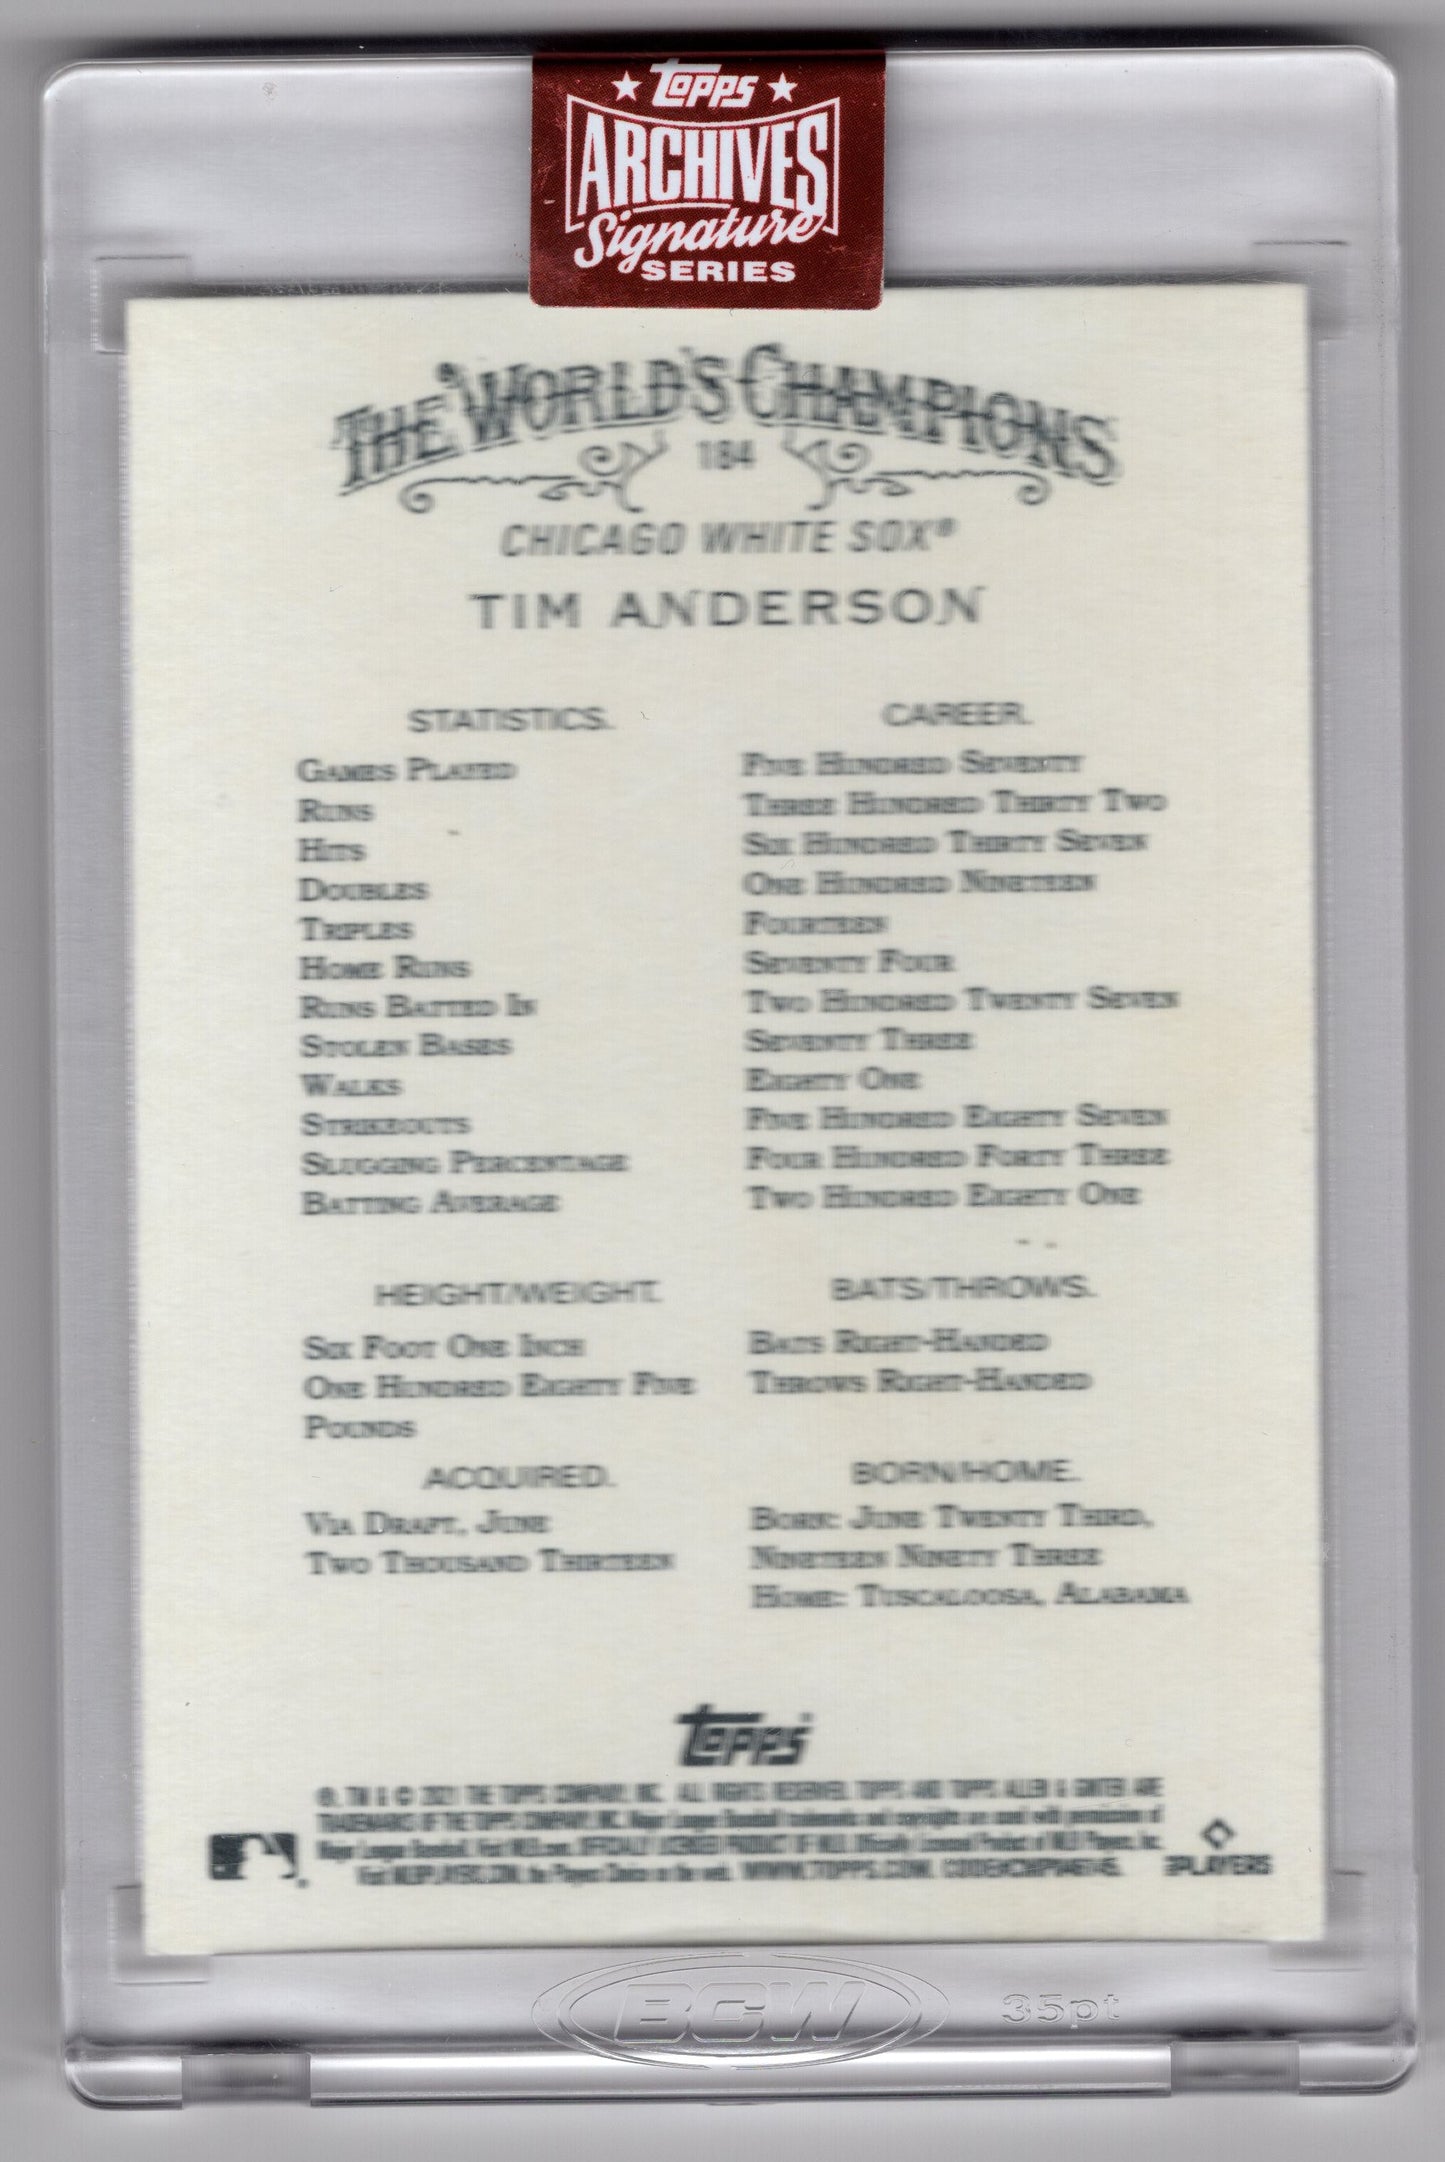 2021 Topps Allen and Ginter Tim Anderson 1 of 1